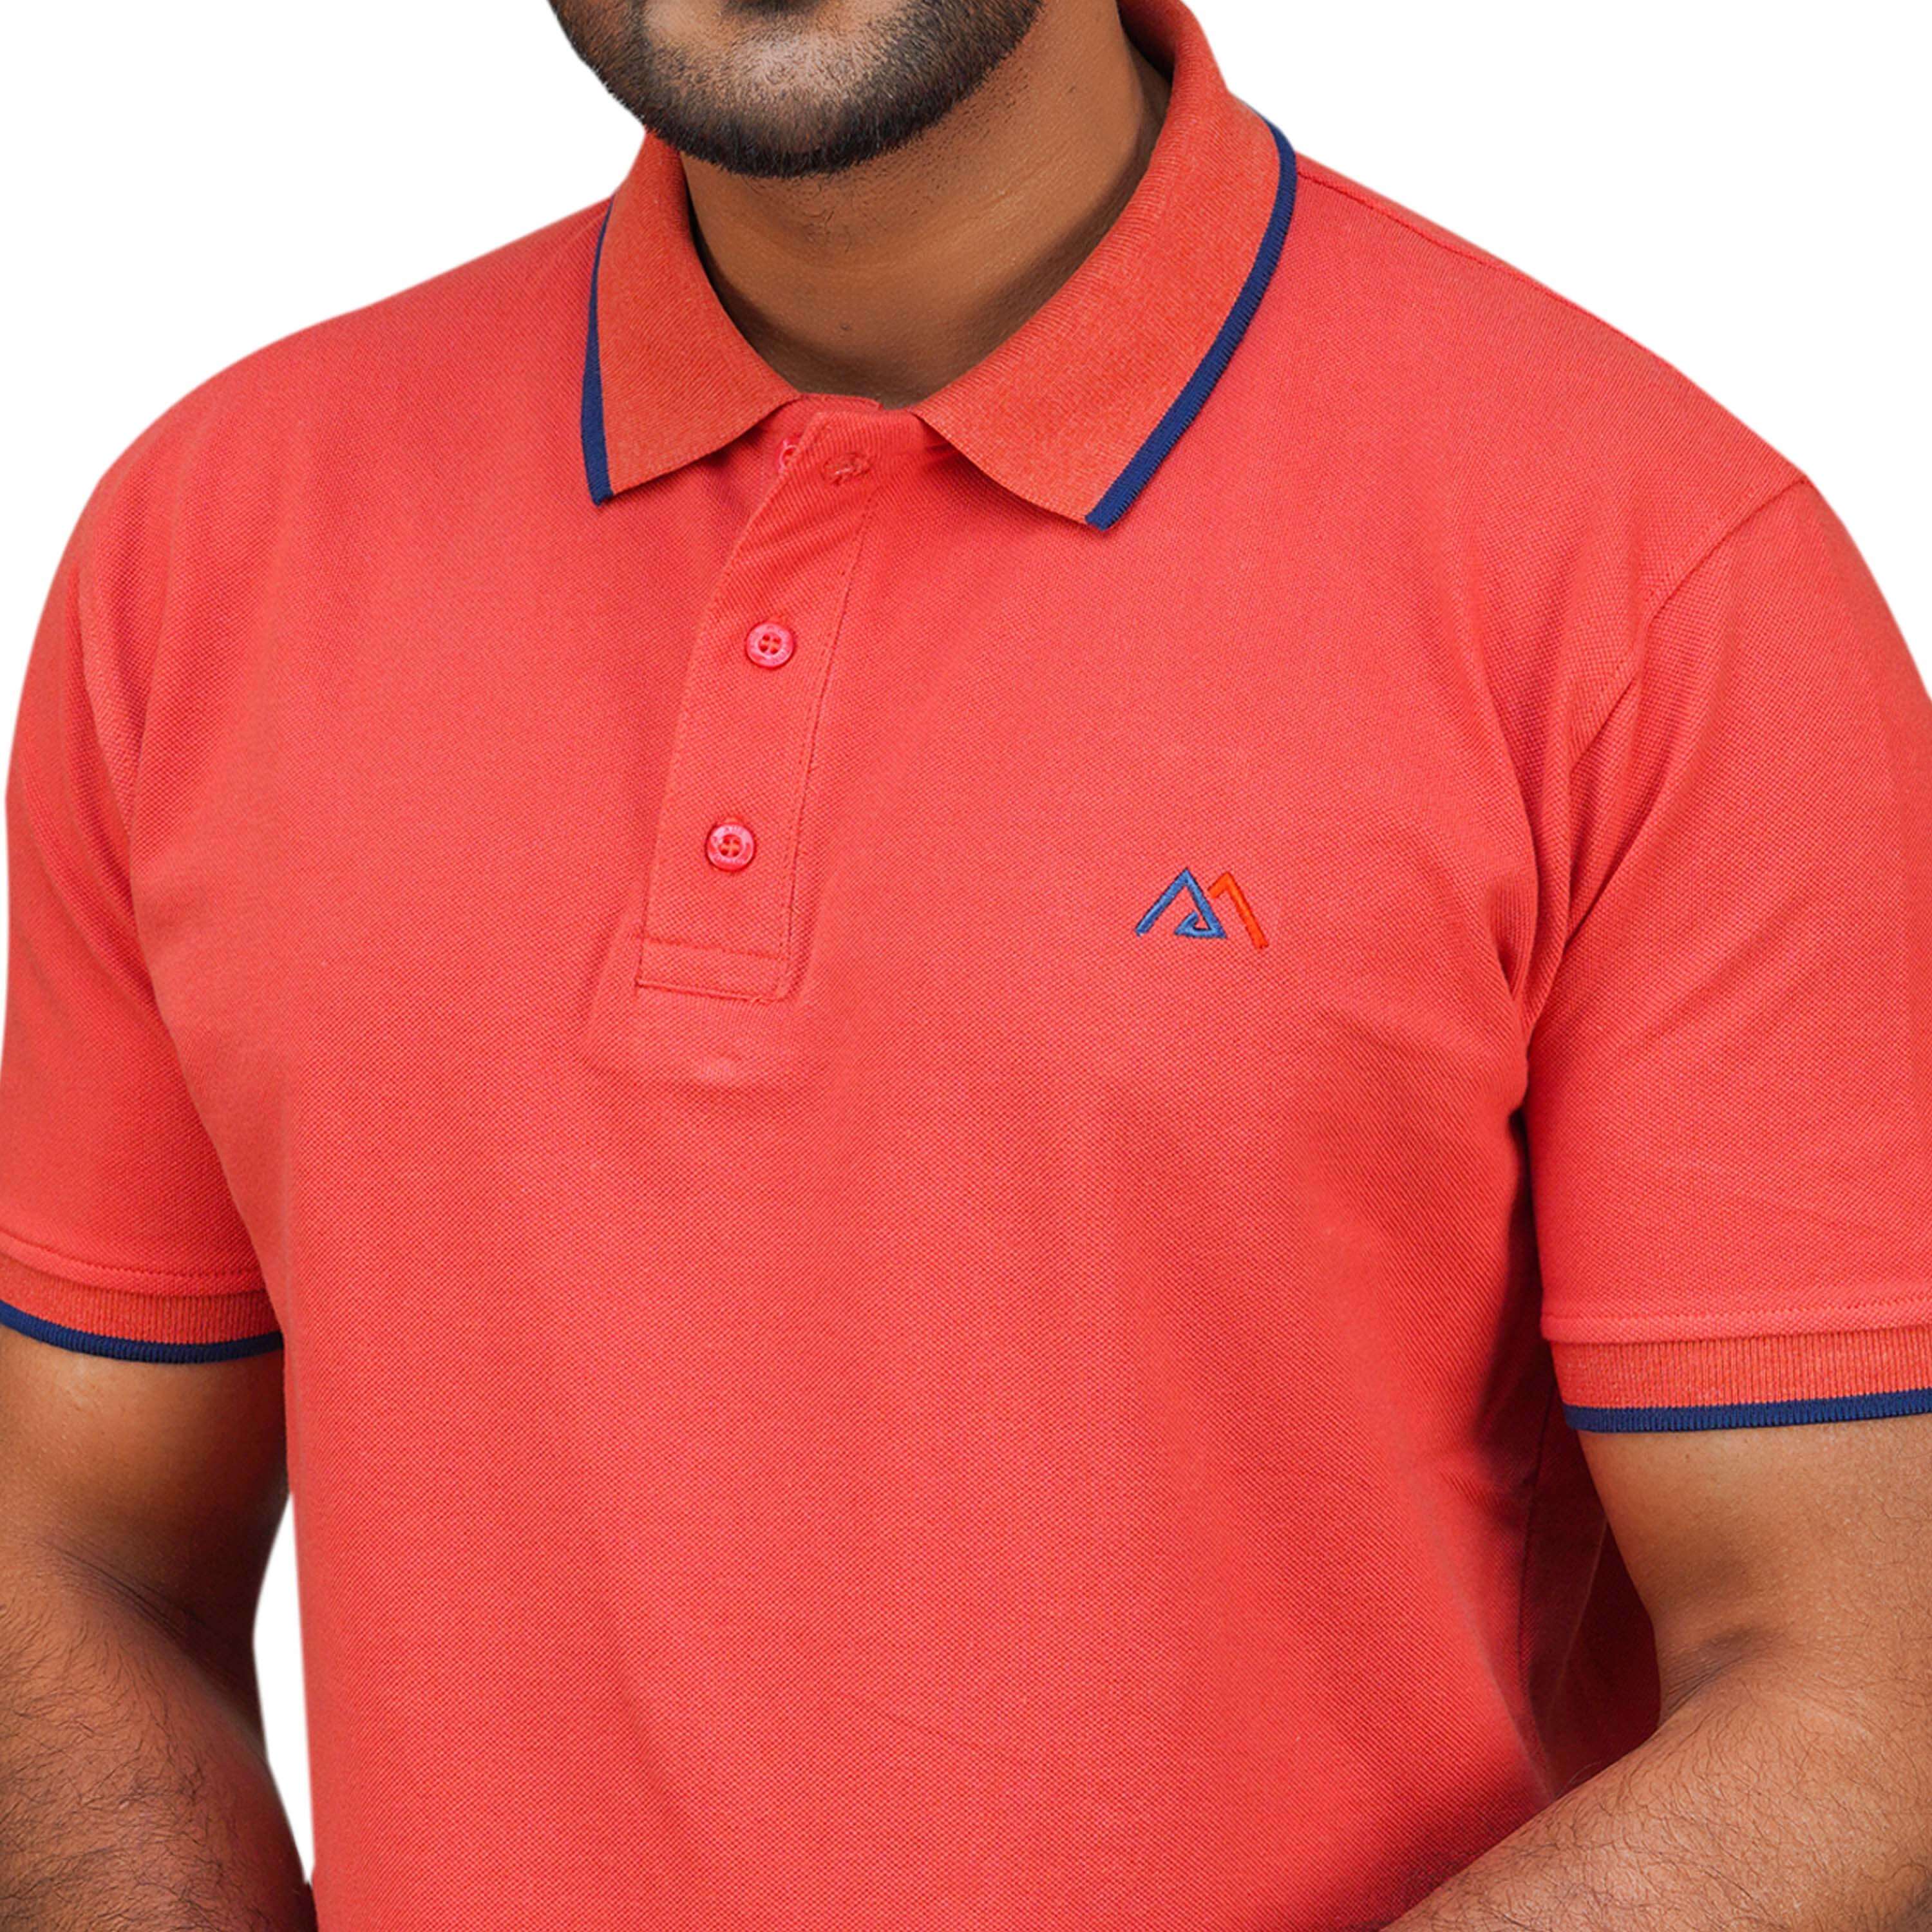 Polo Shirt for Men  Solid Vivid Pink Color